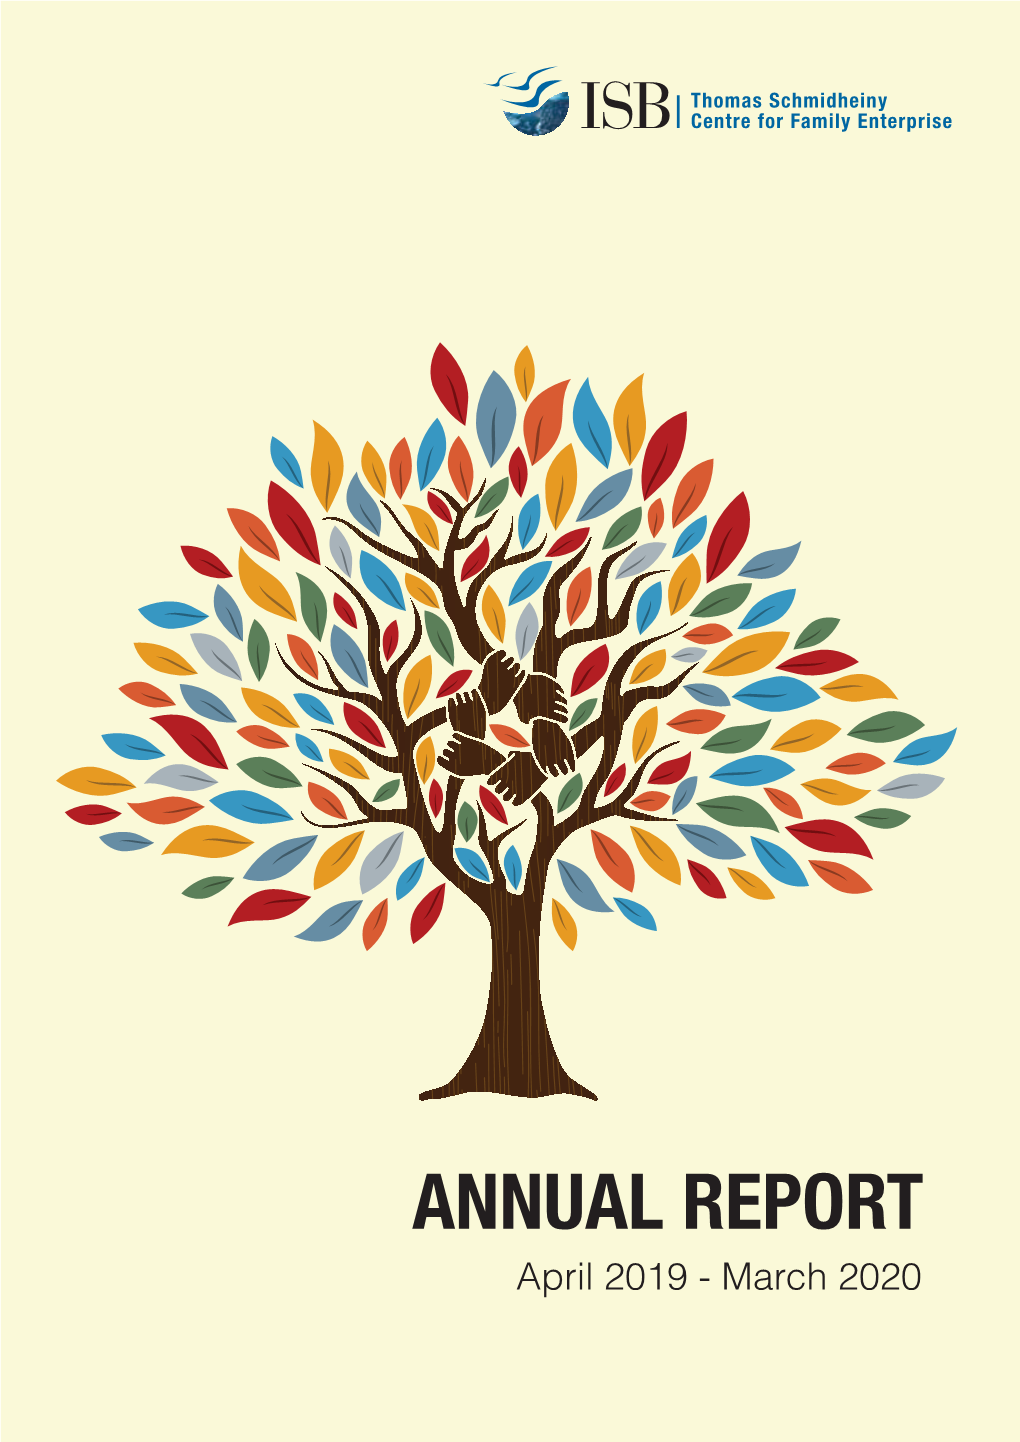 ANNUAL REPORT April 2019 - March 2020 VISION to Create Value for Society and Business Families by Developing Their Stewardship Capabilities